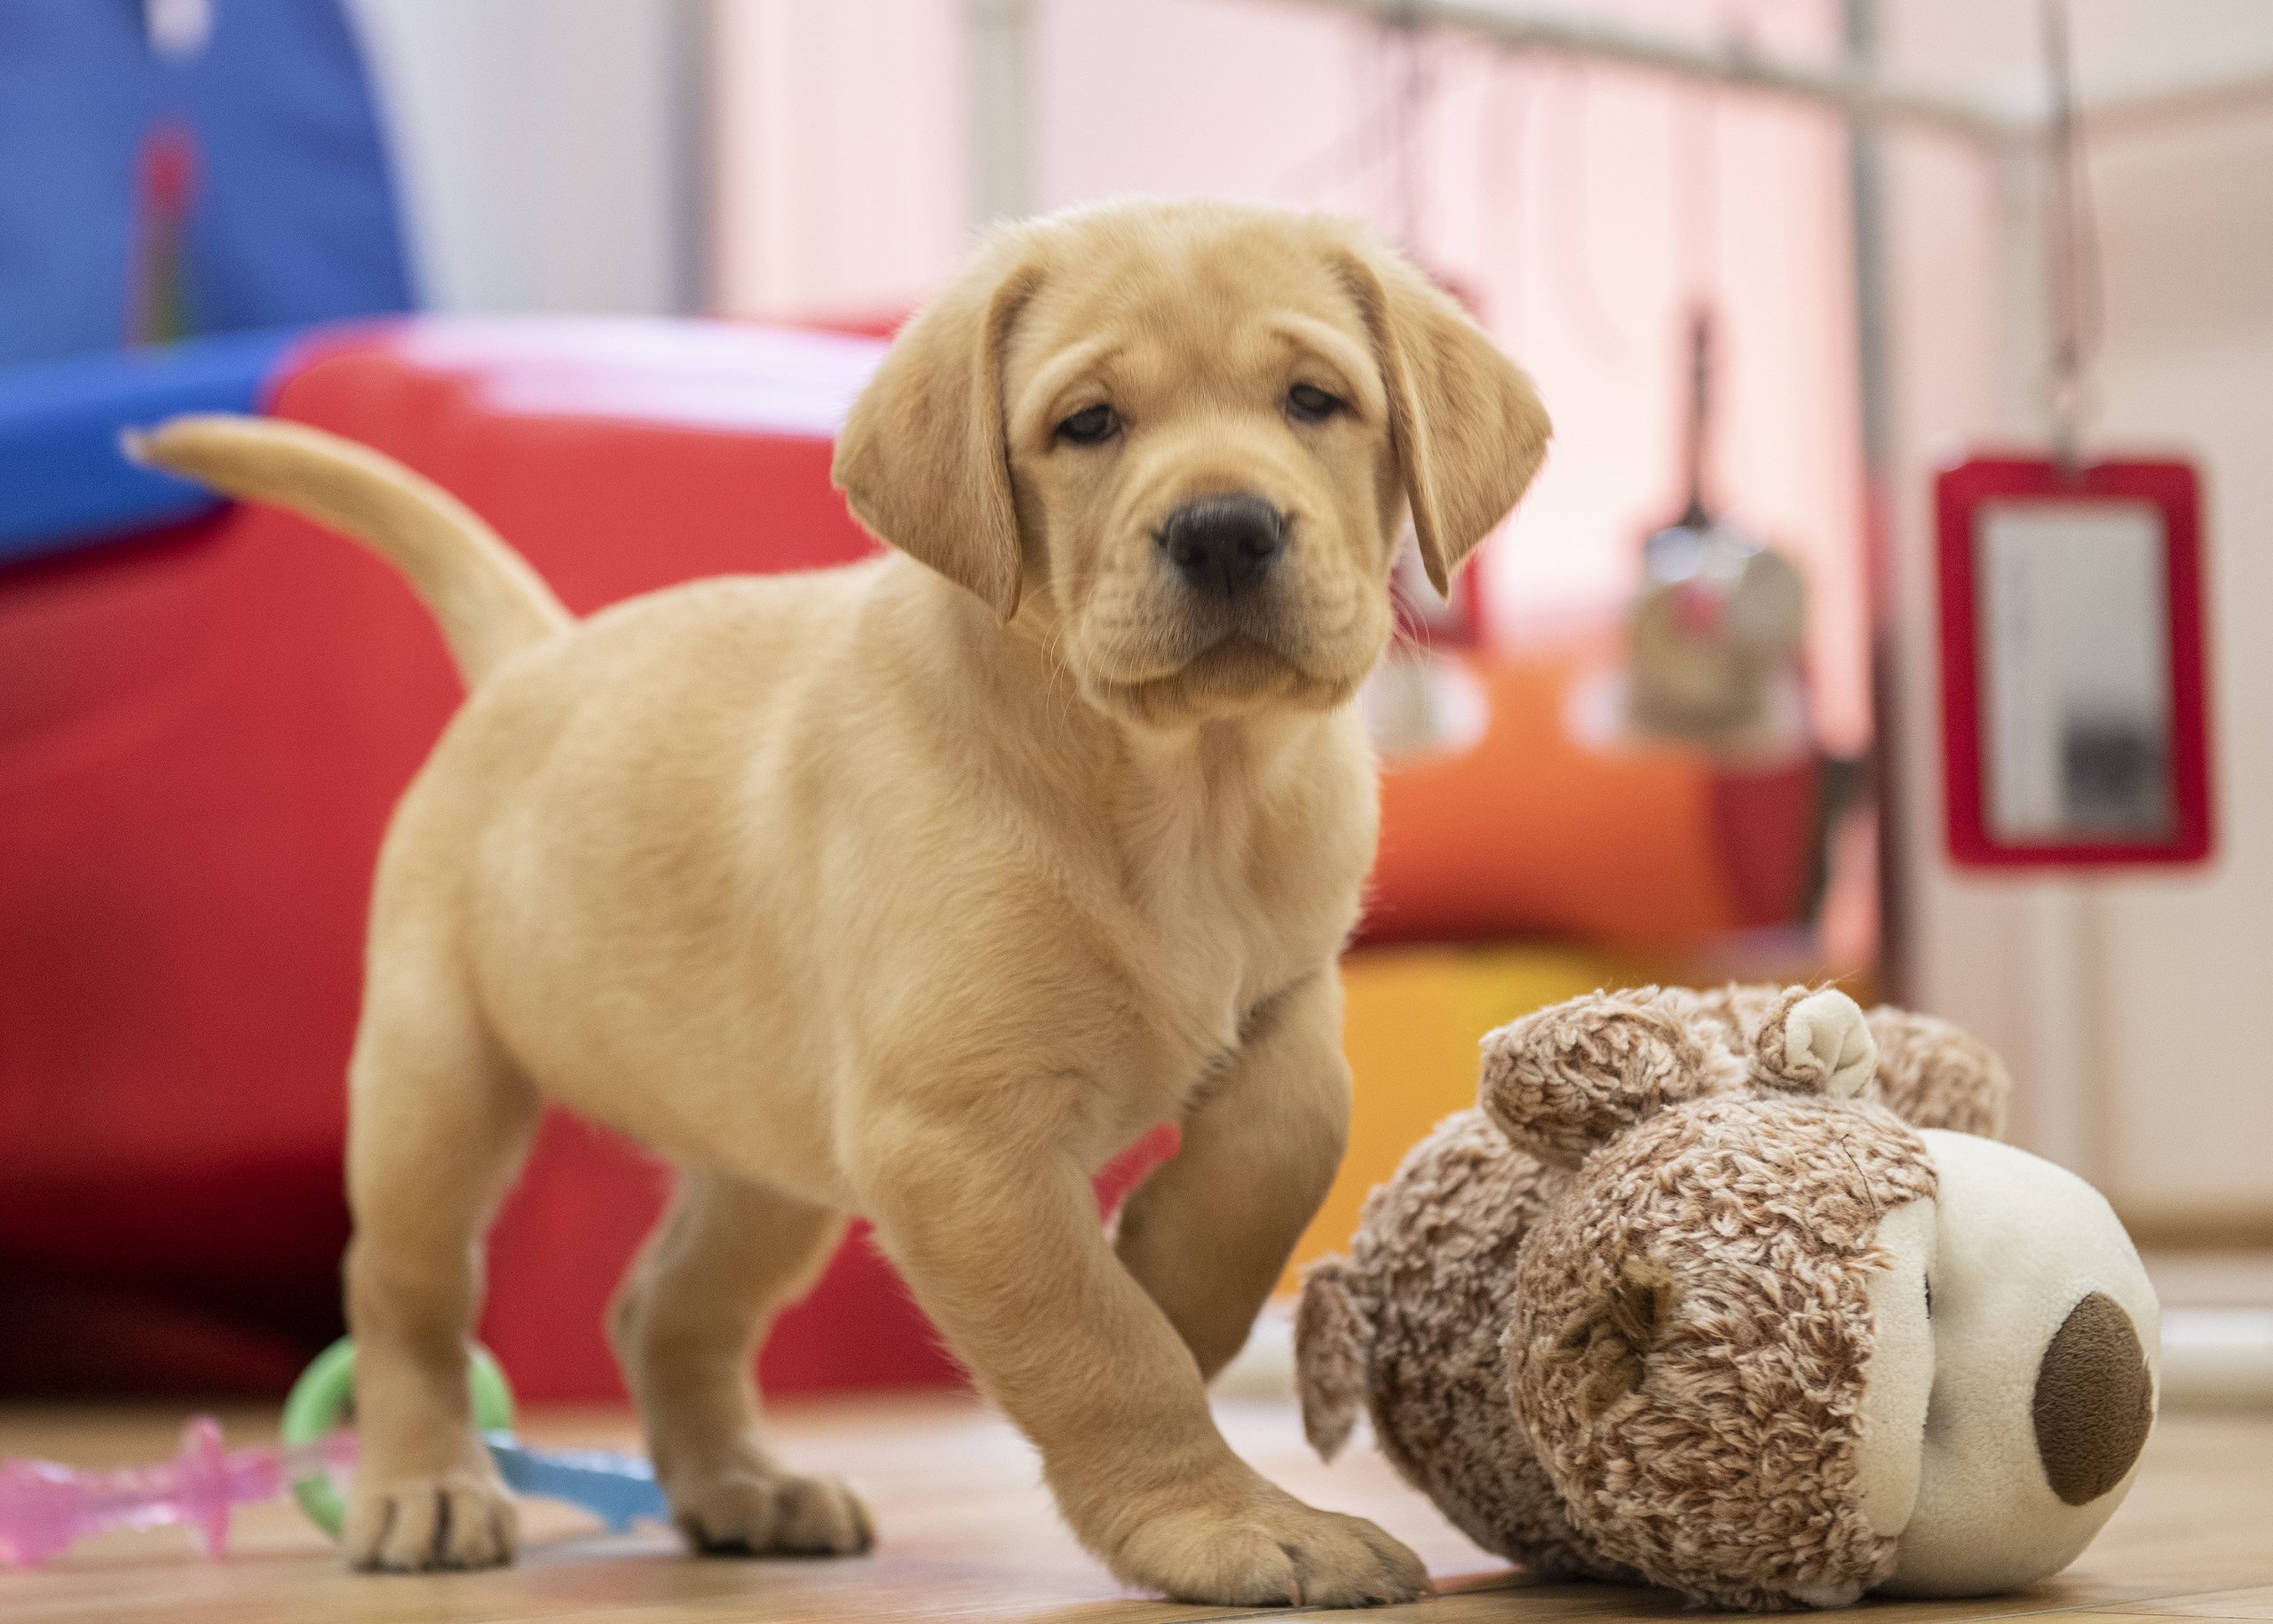 Yellow lab puppy looks at camera and stands next to plush toy